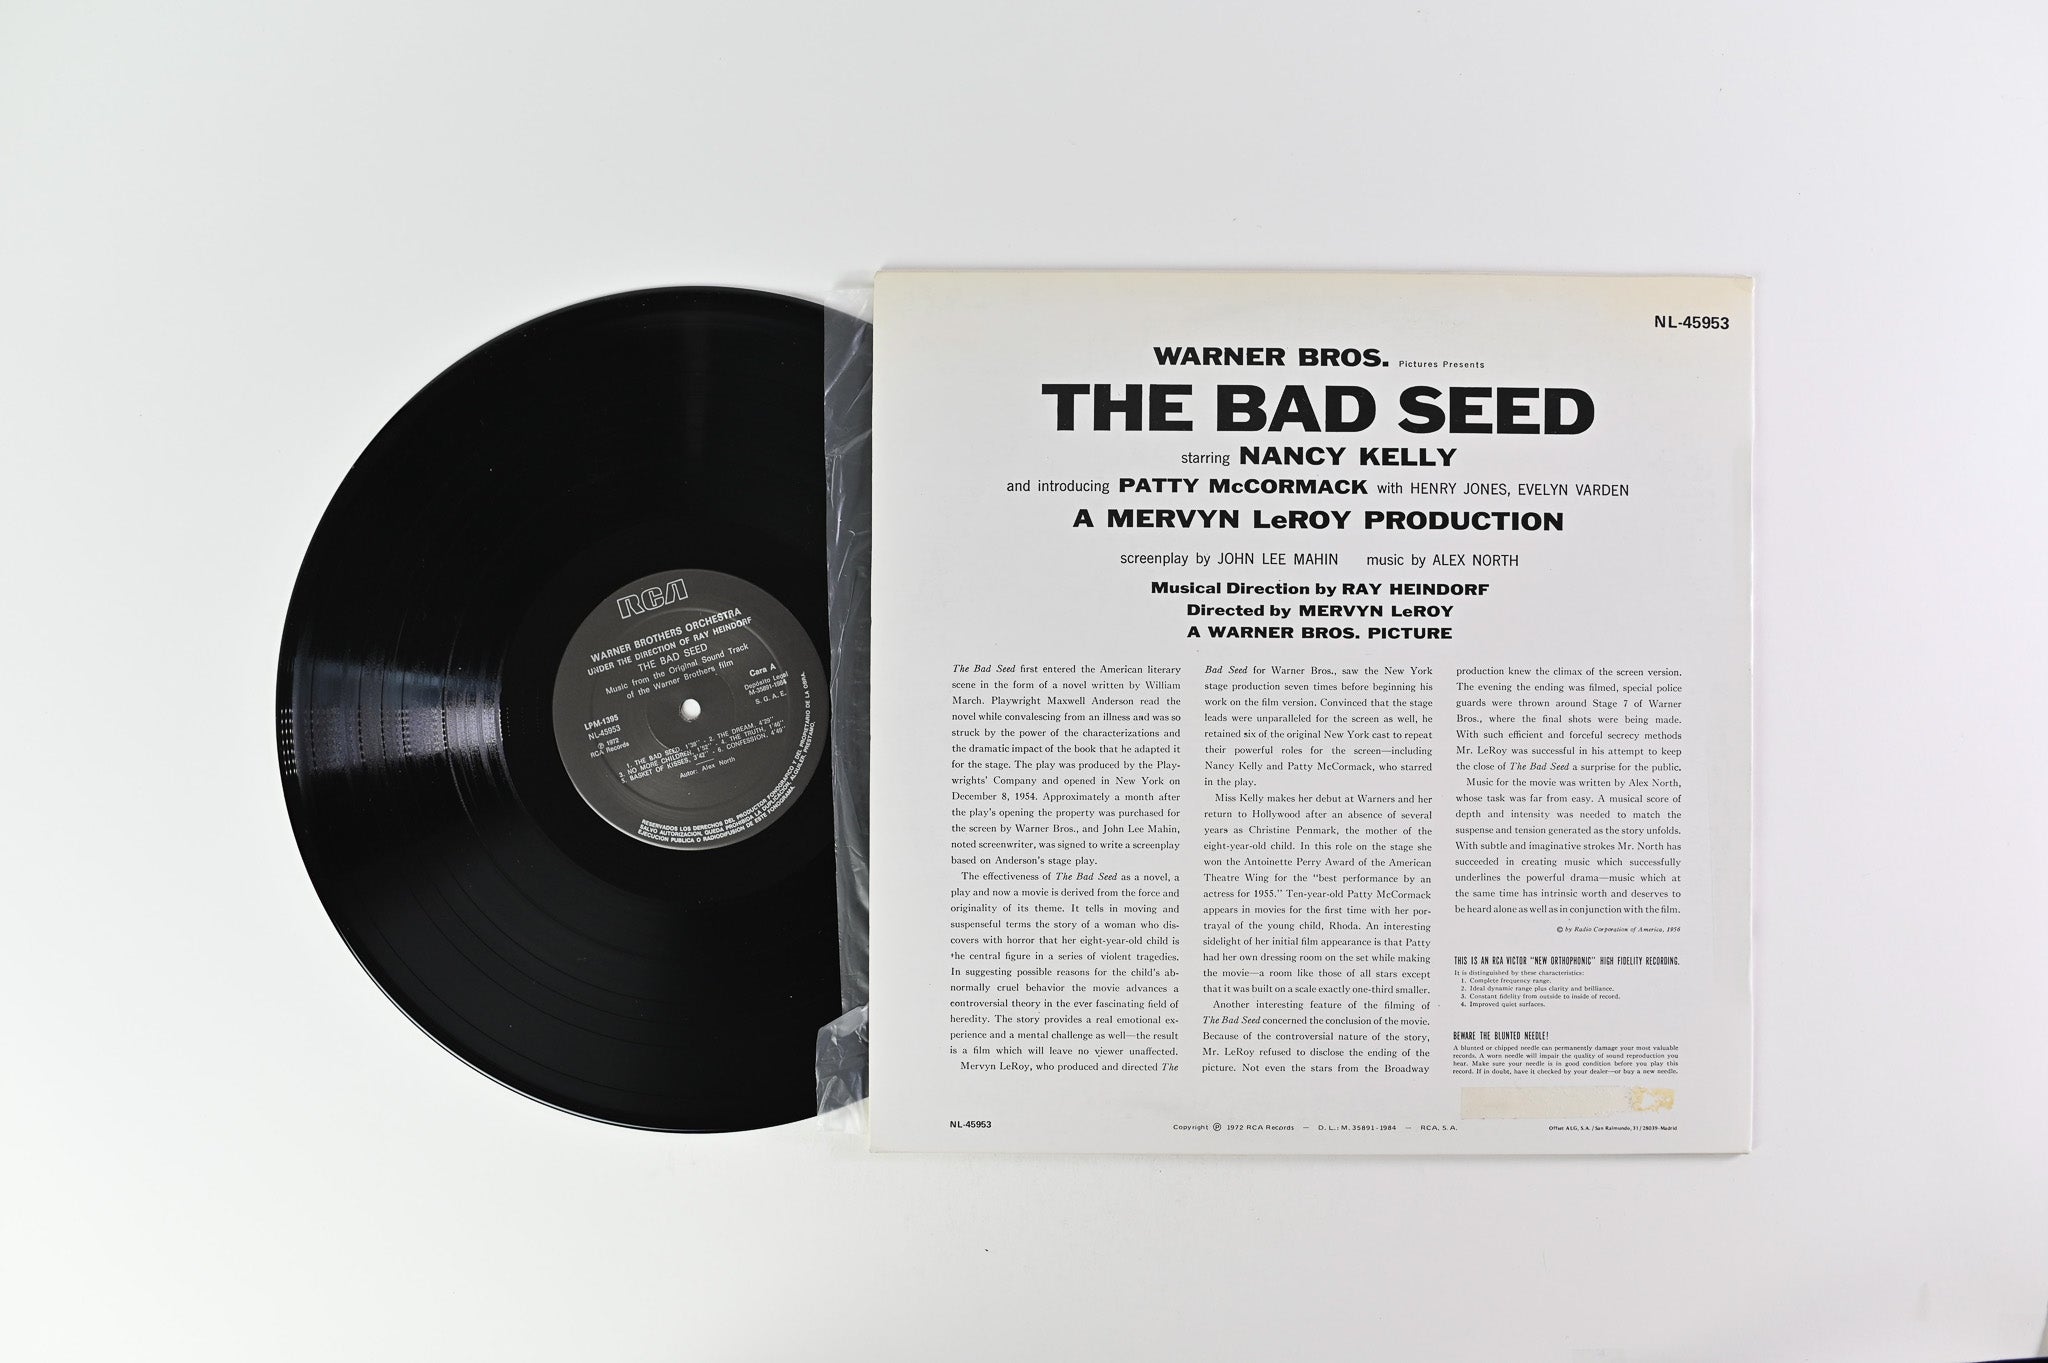 Alex North - The Bad Seed on RCA Victor